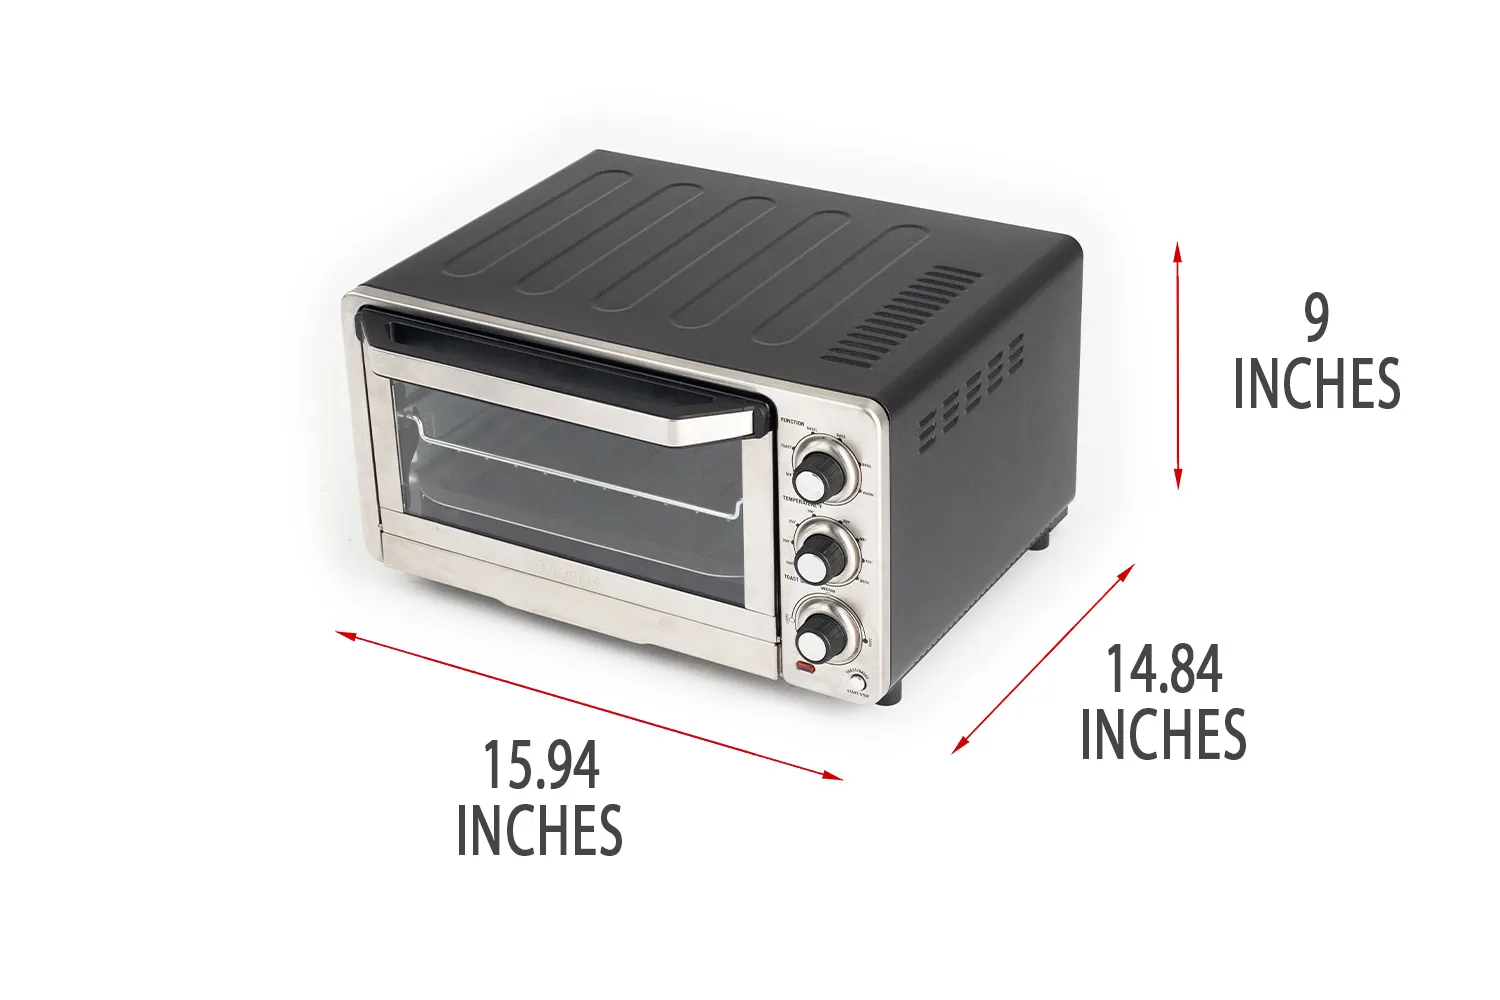 https://cdn.healthykitchen101.com/reviews/images/toaster-ovens/clbvlsyn300006288a1qnd0p5.jpg